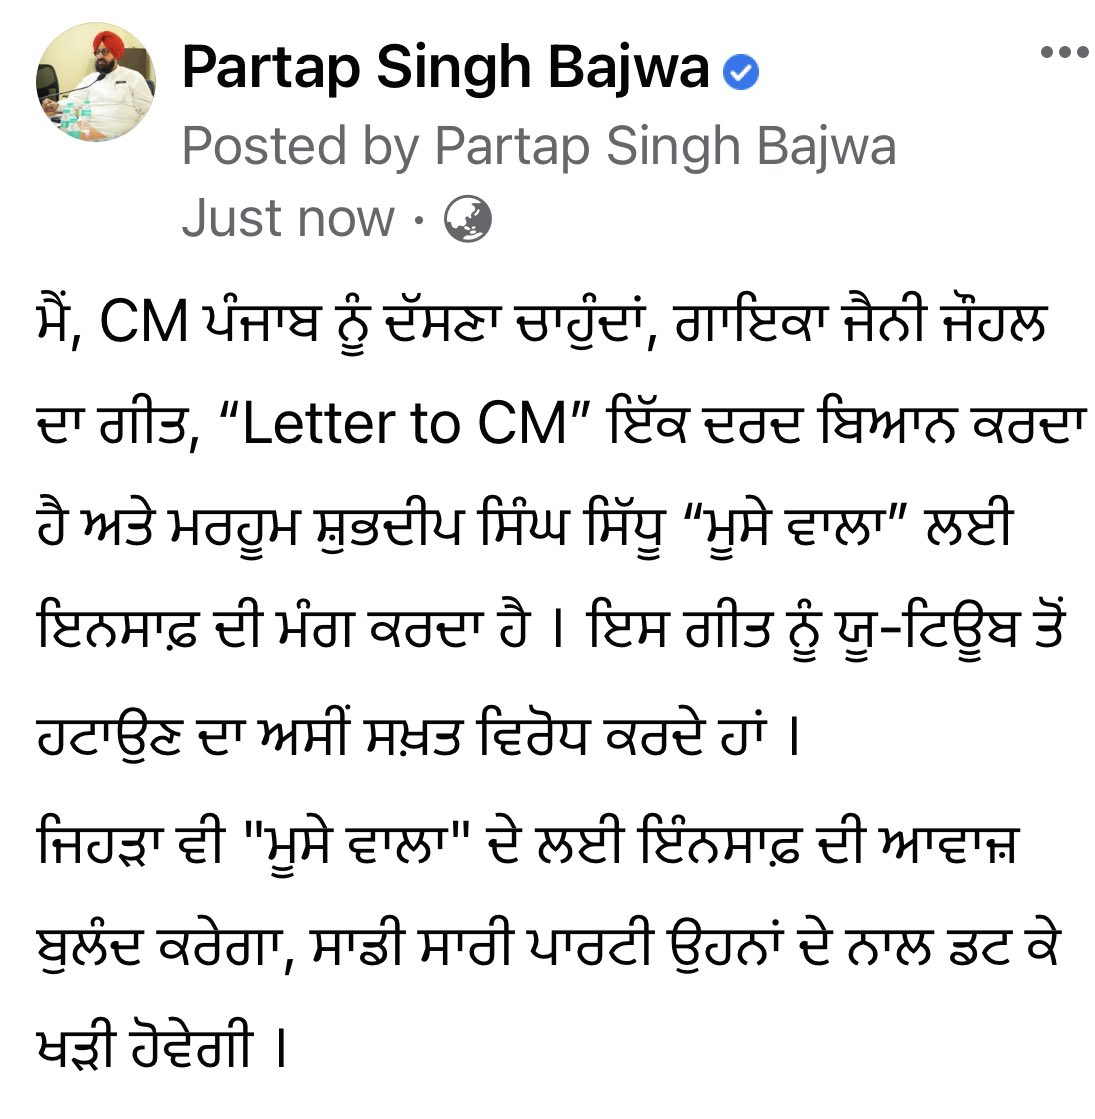 RT @Partap_Sbajwa: My statement on removal of Jenny Johal’s song from YouTube at the instance of Bhagwant Mann Govt. https://t.co/5m9oEALRre